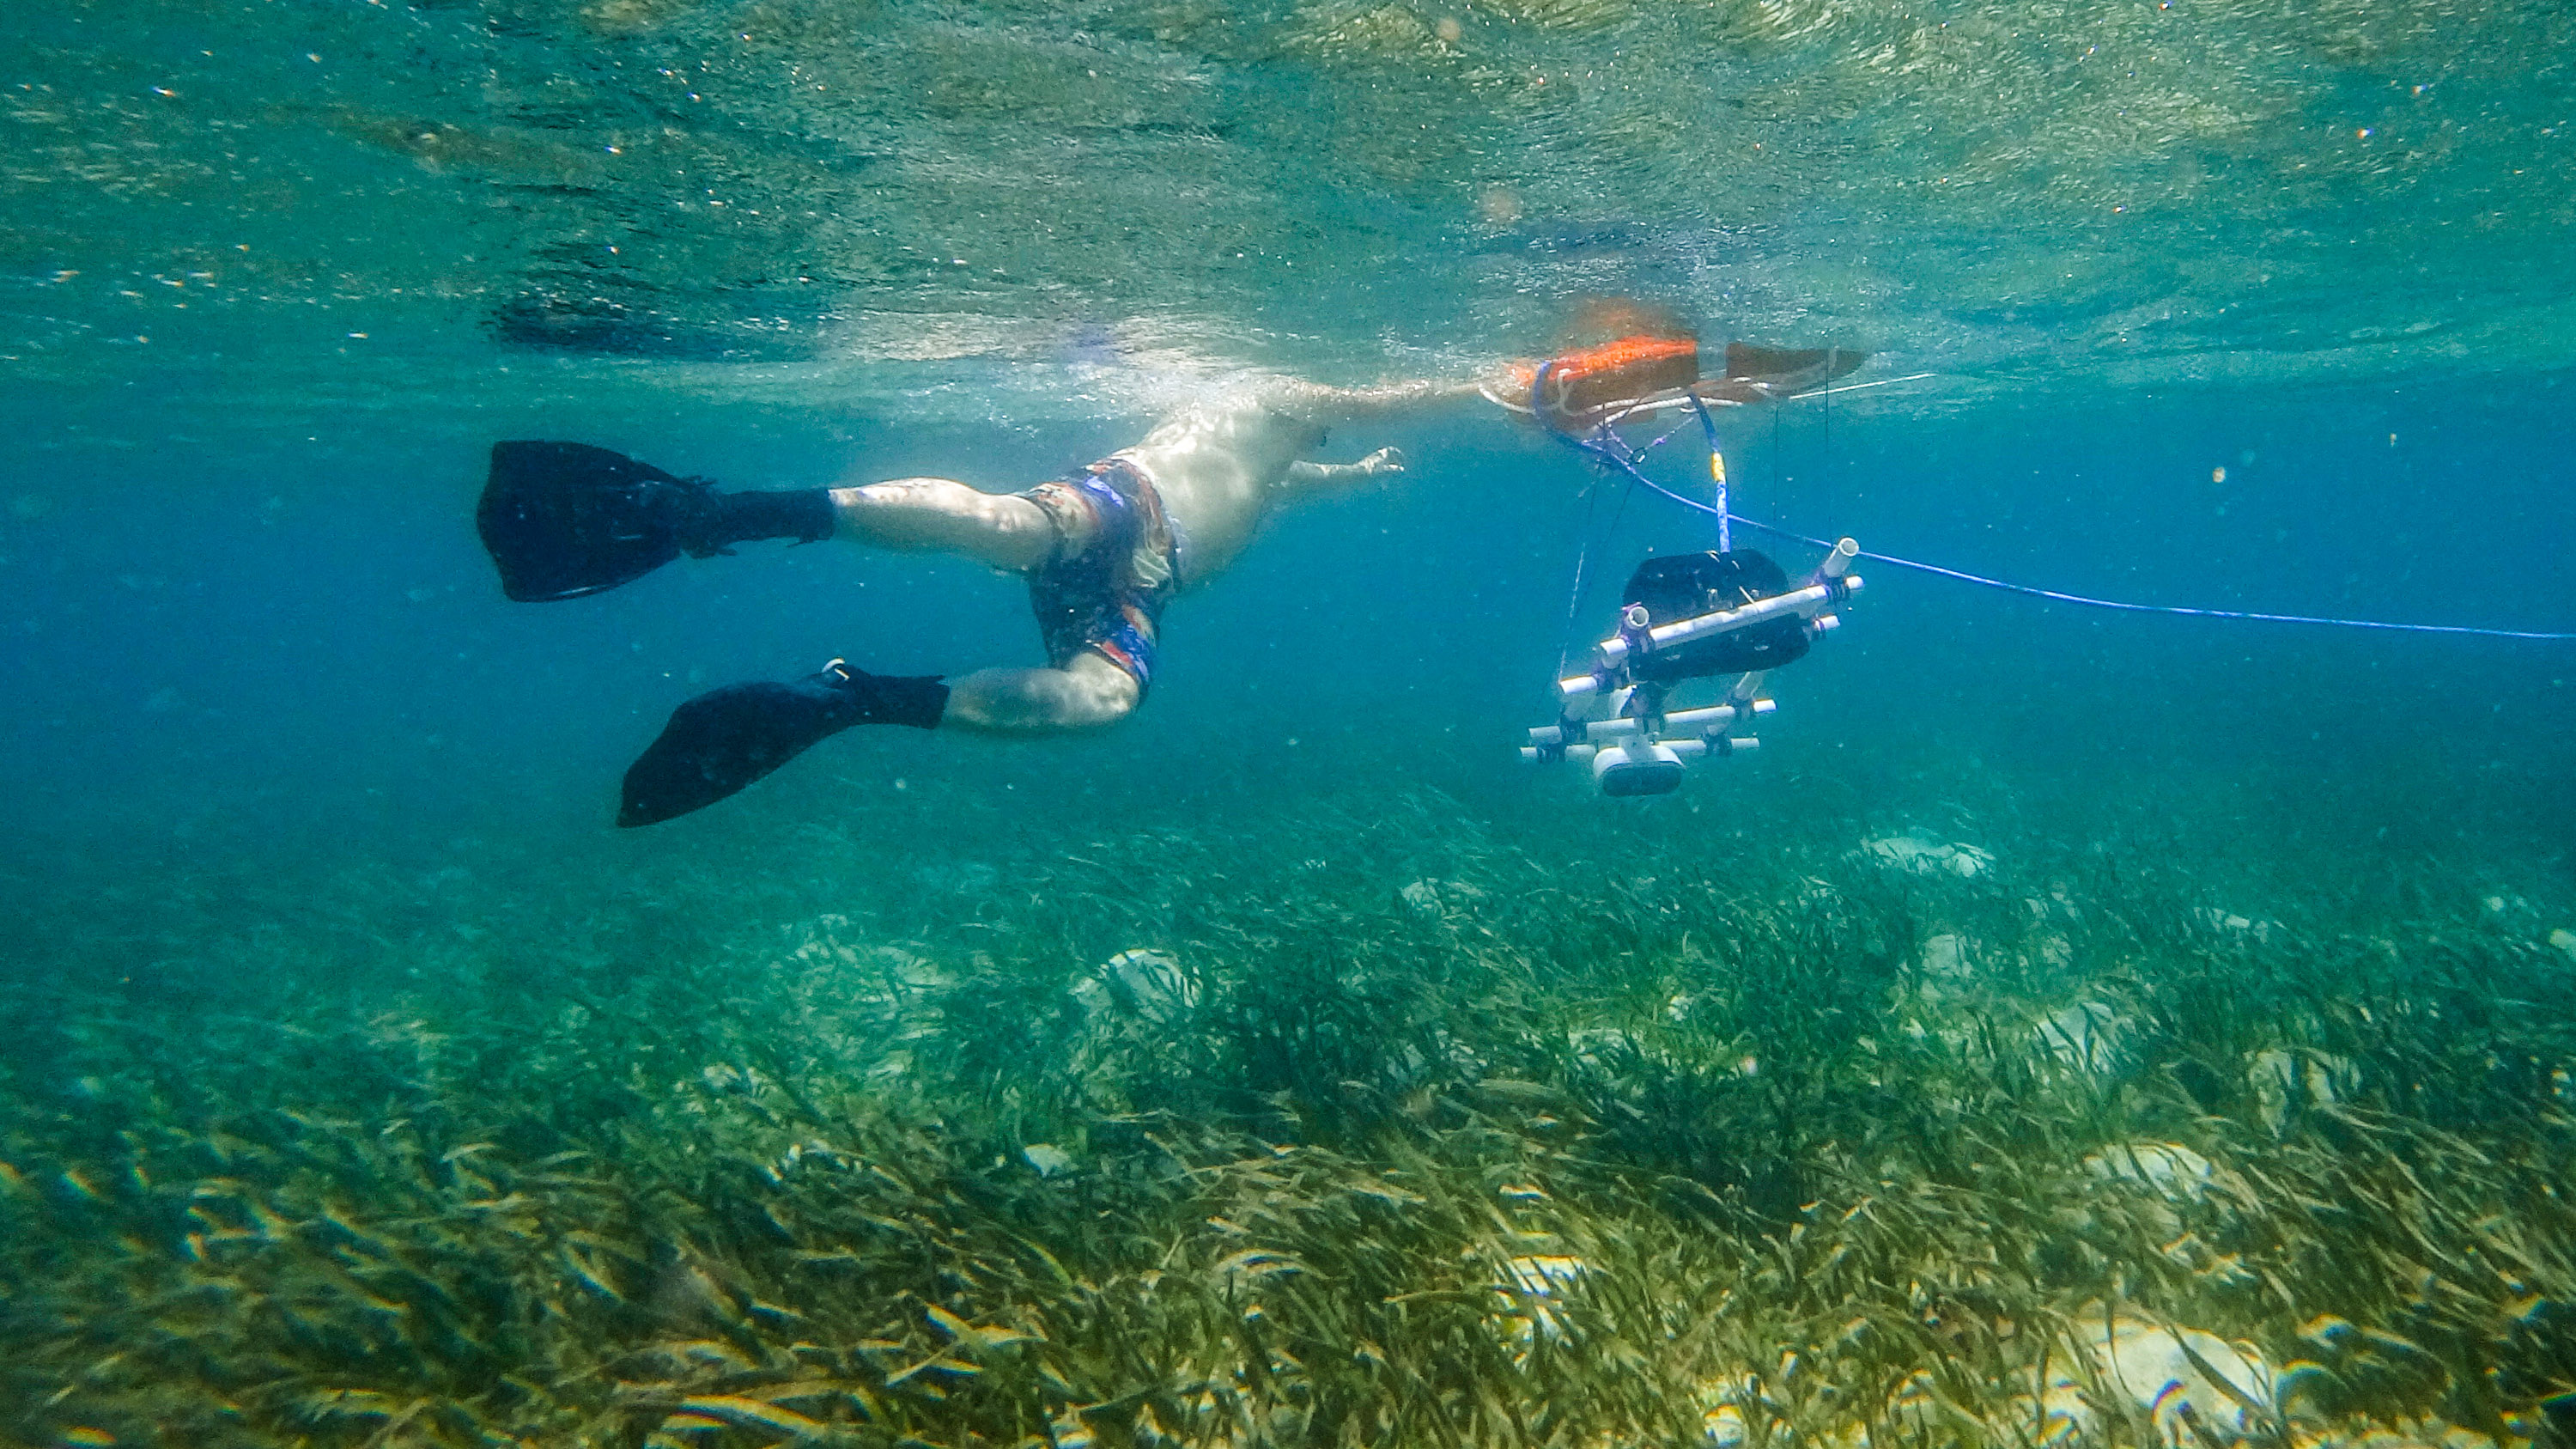 underwater view of person in flippers puling camera system over seagrass